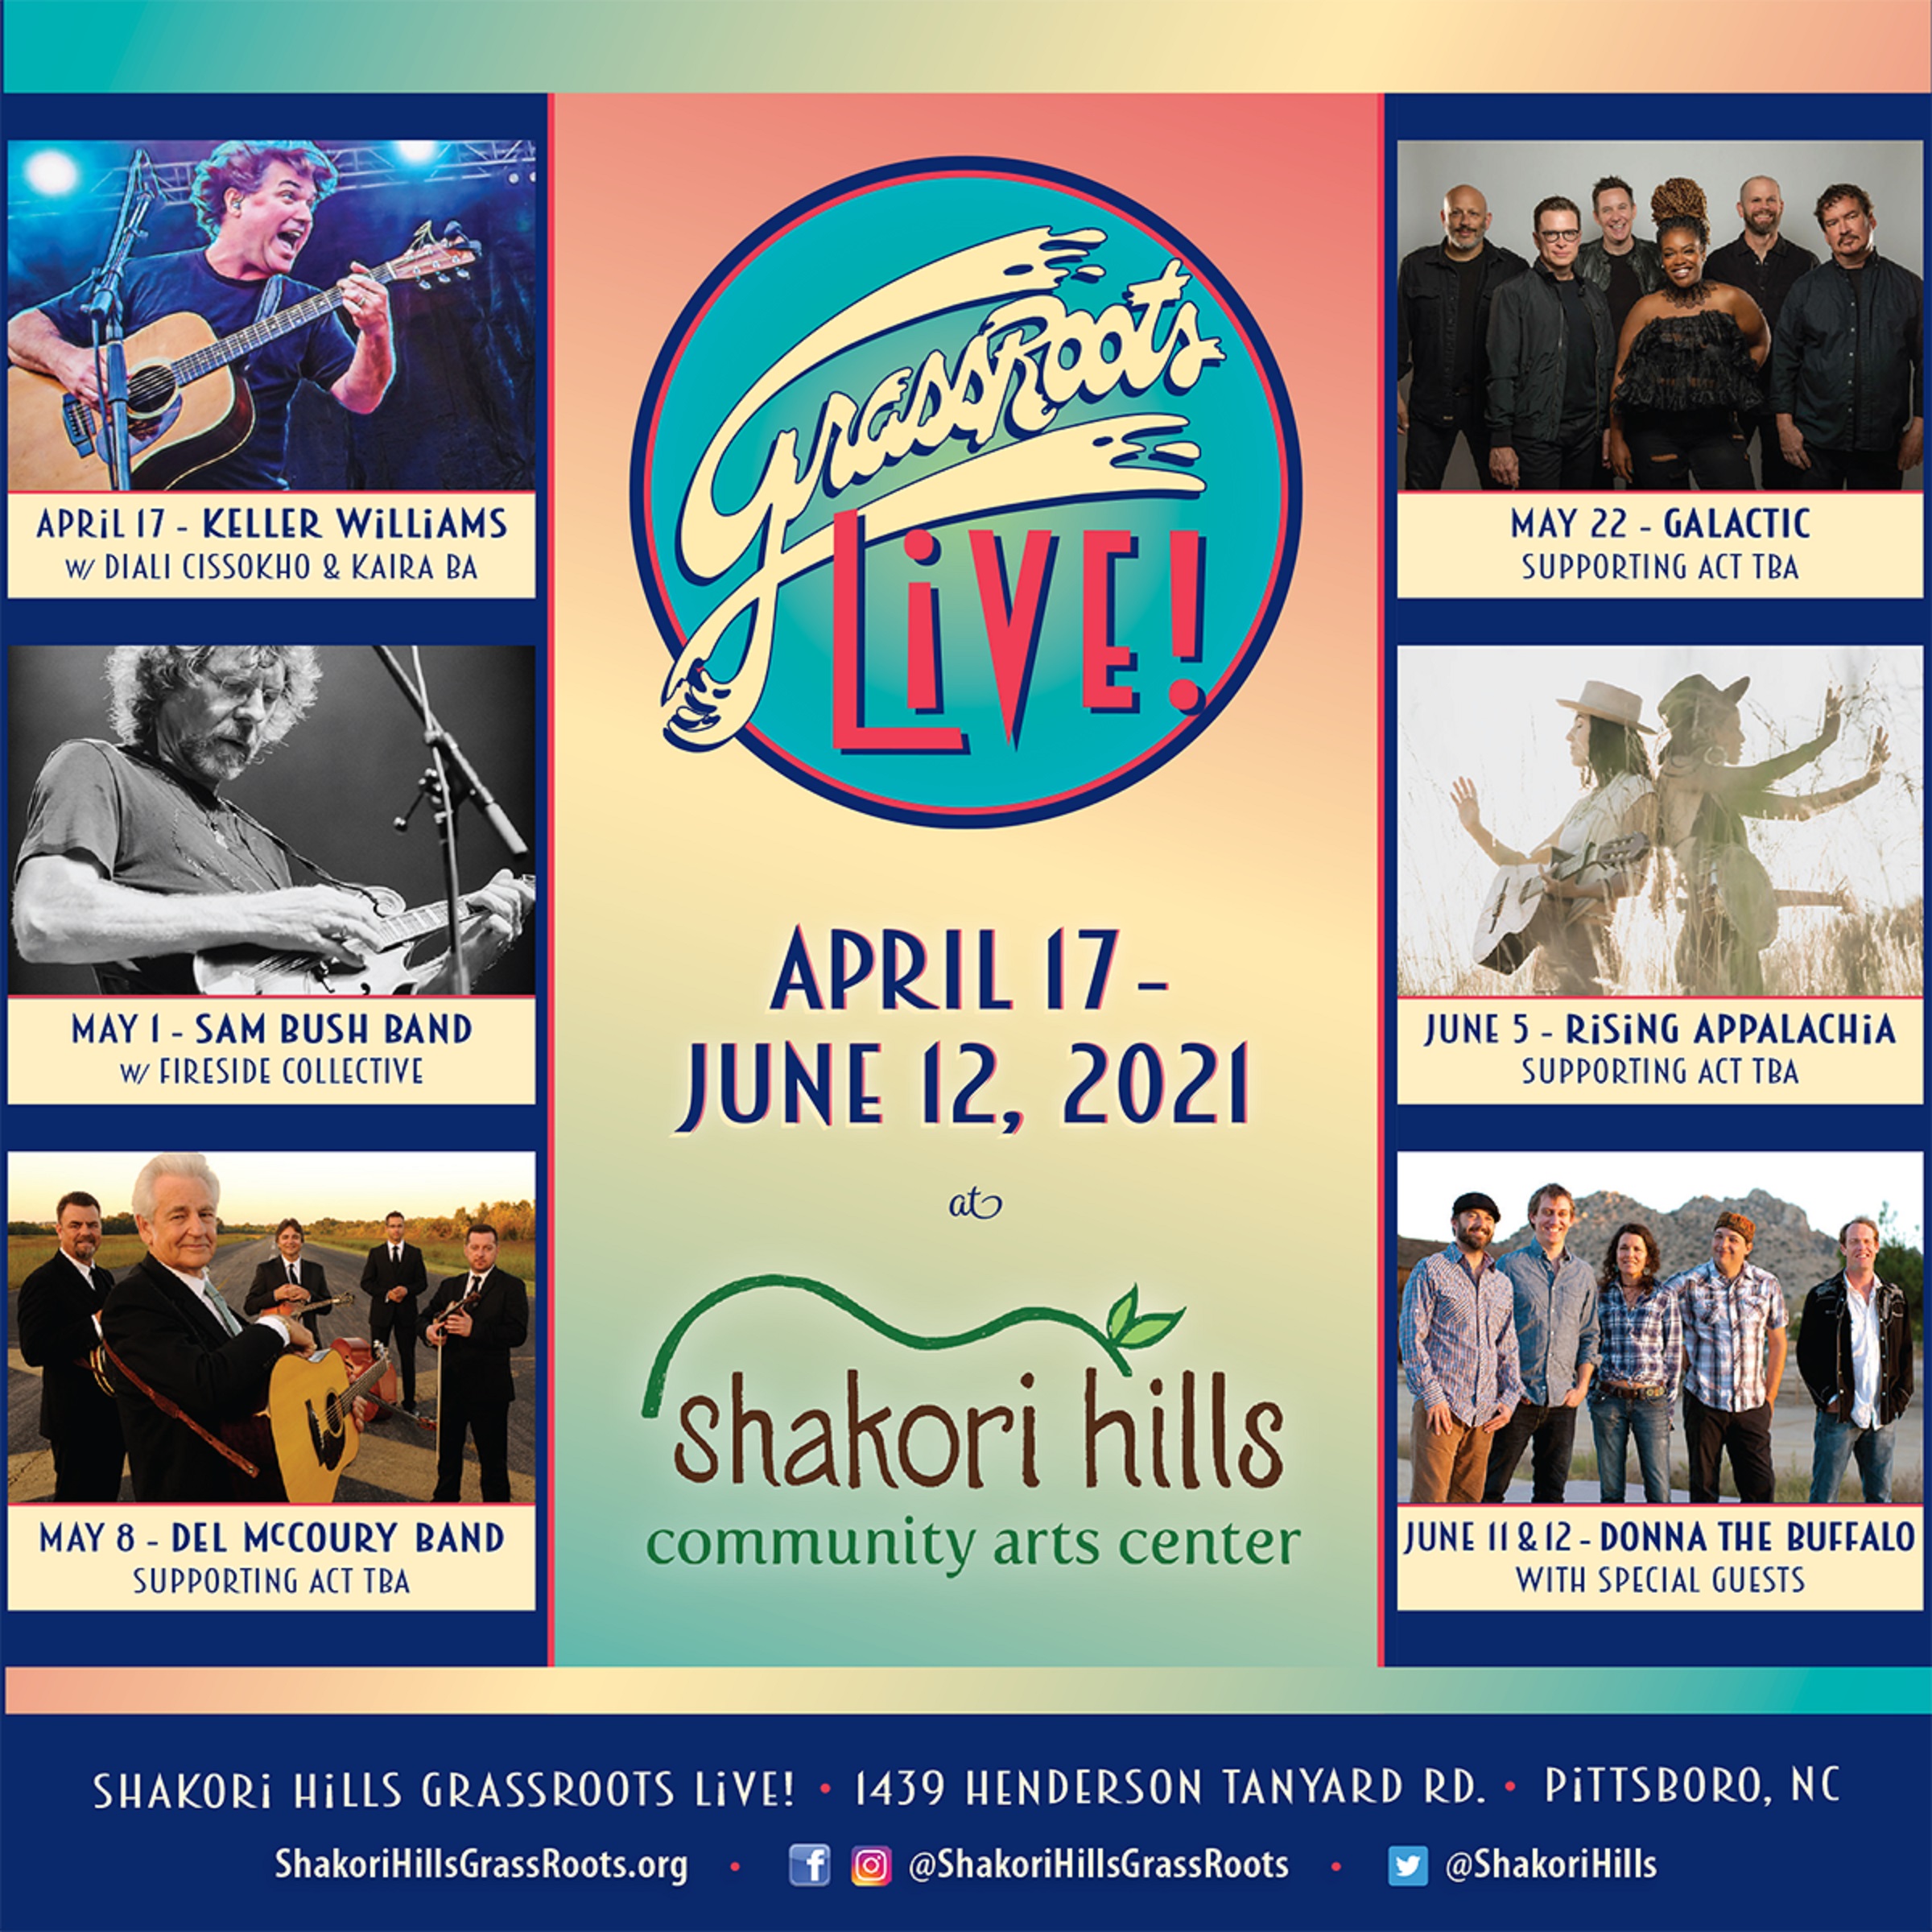 Tickets On-Sale Now To GrassRoots Live at Shakori Hills Spring 2021